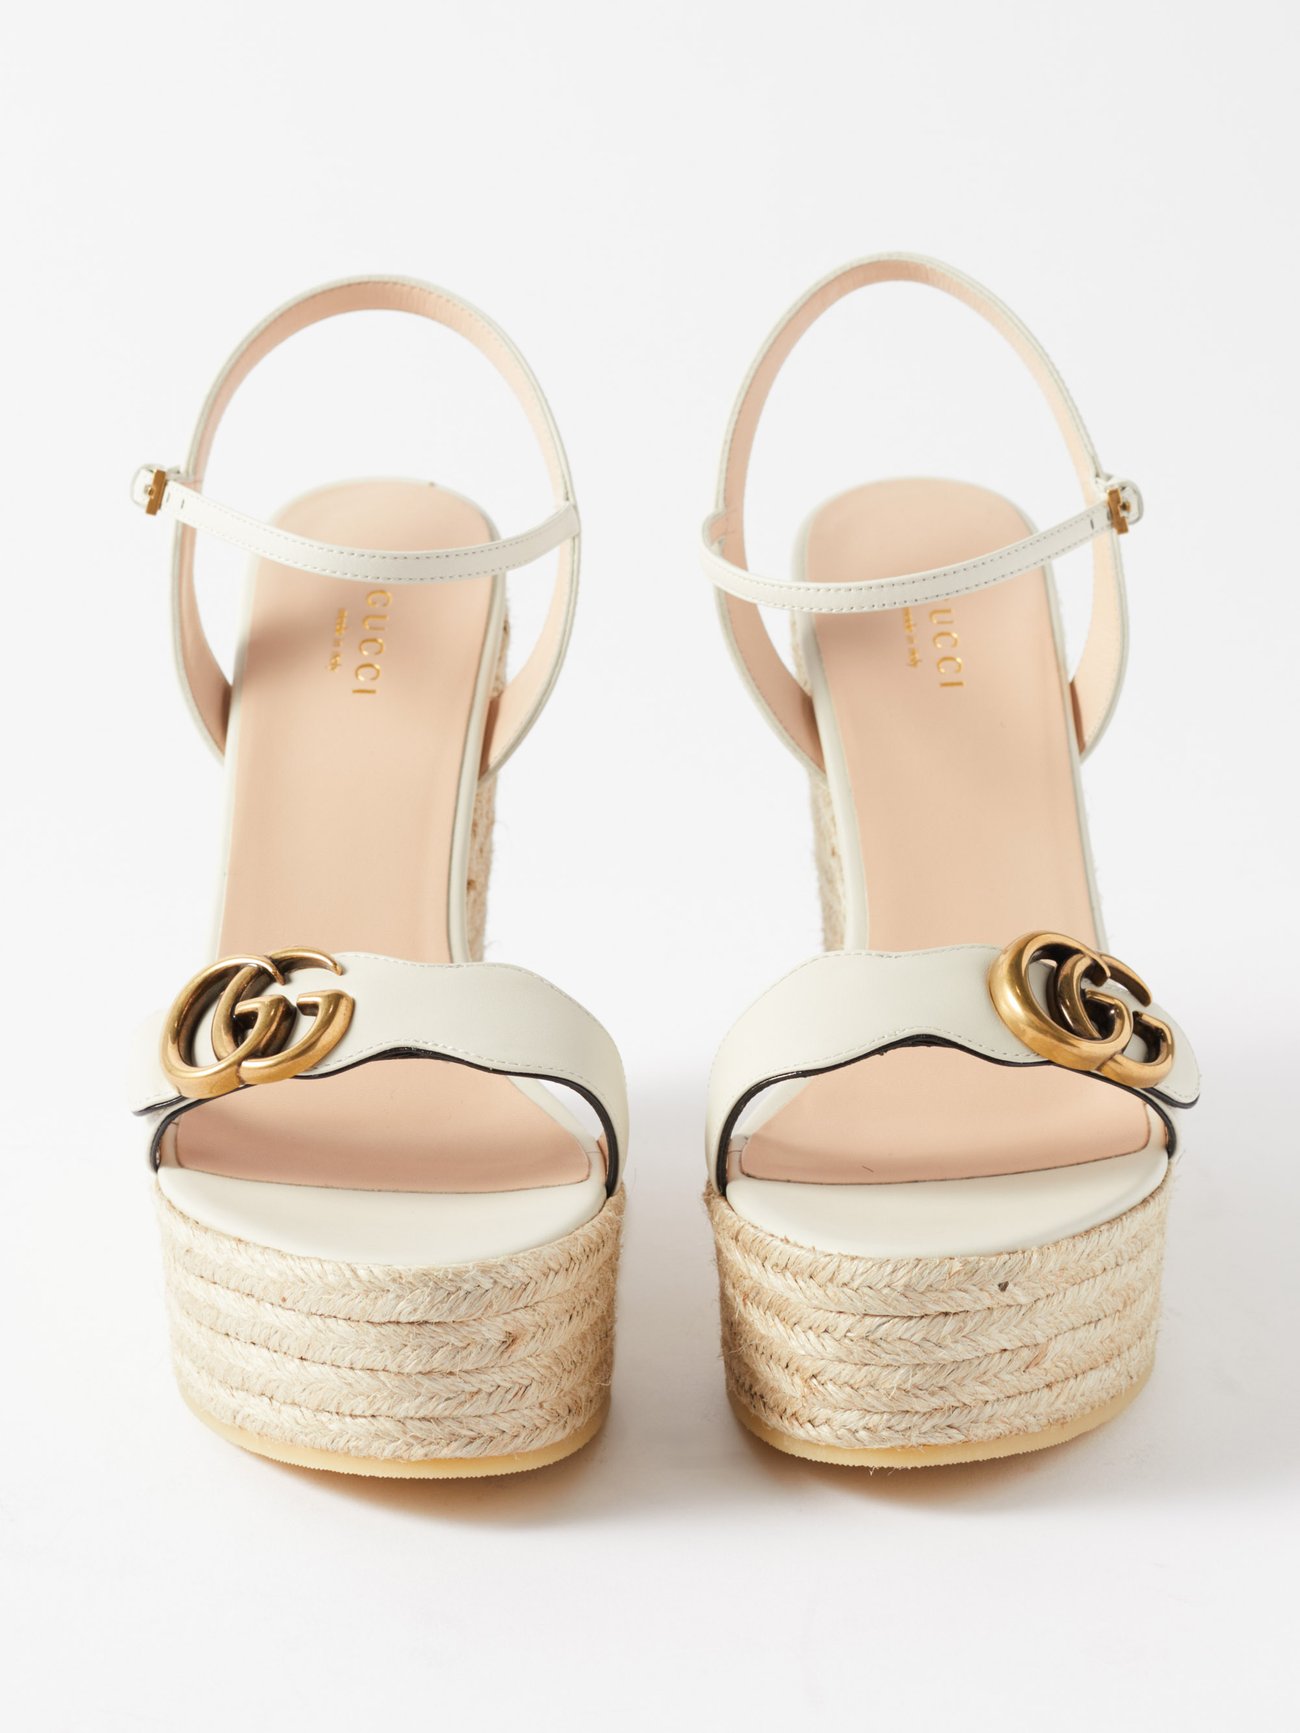 Gucci Double G Wedge Sandals 130 In White